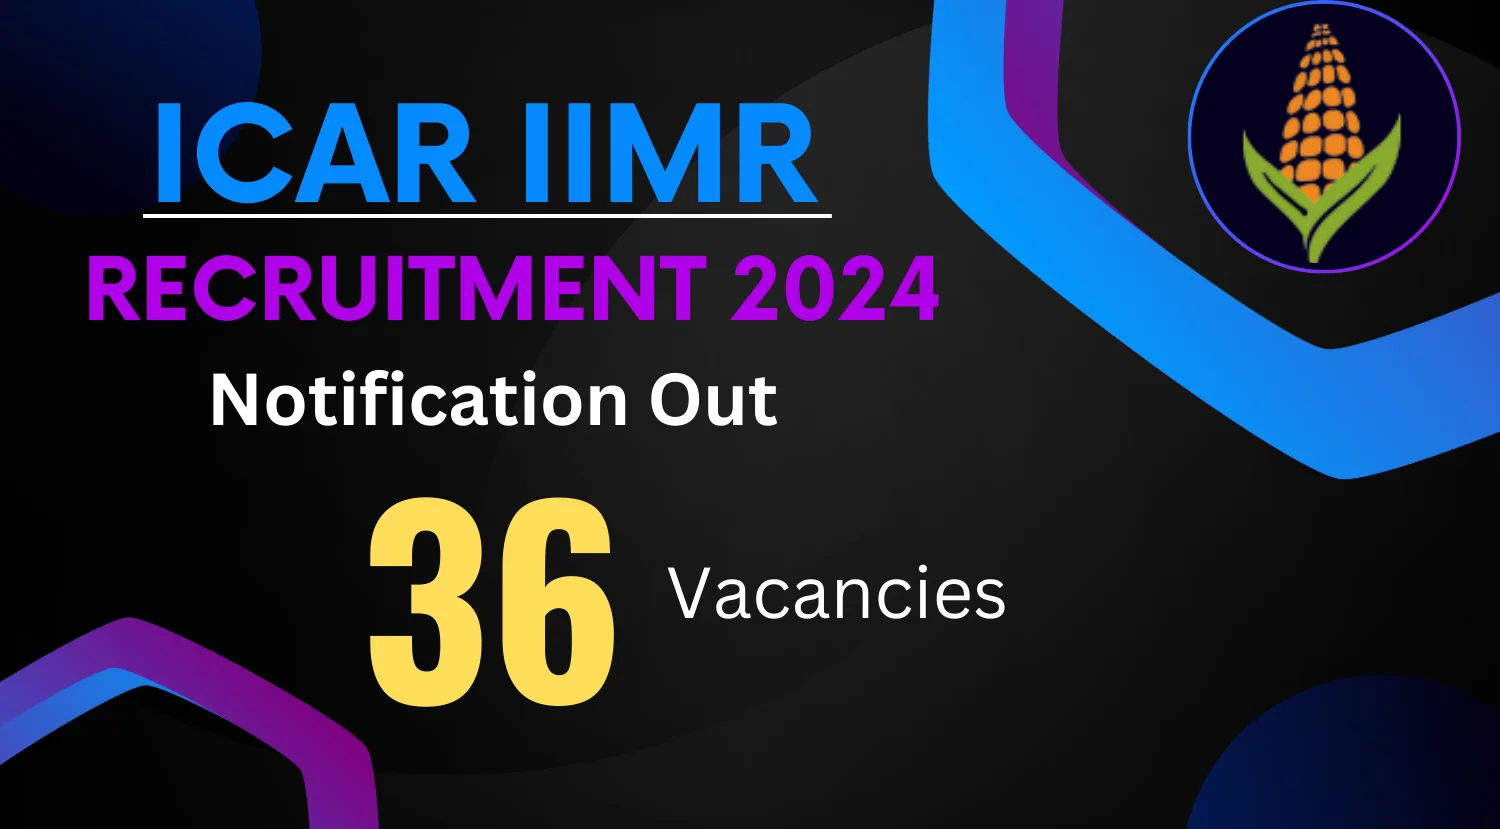 ICAR IIMR Recruitment 2024 Notification Out for 36 Vacancies